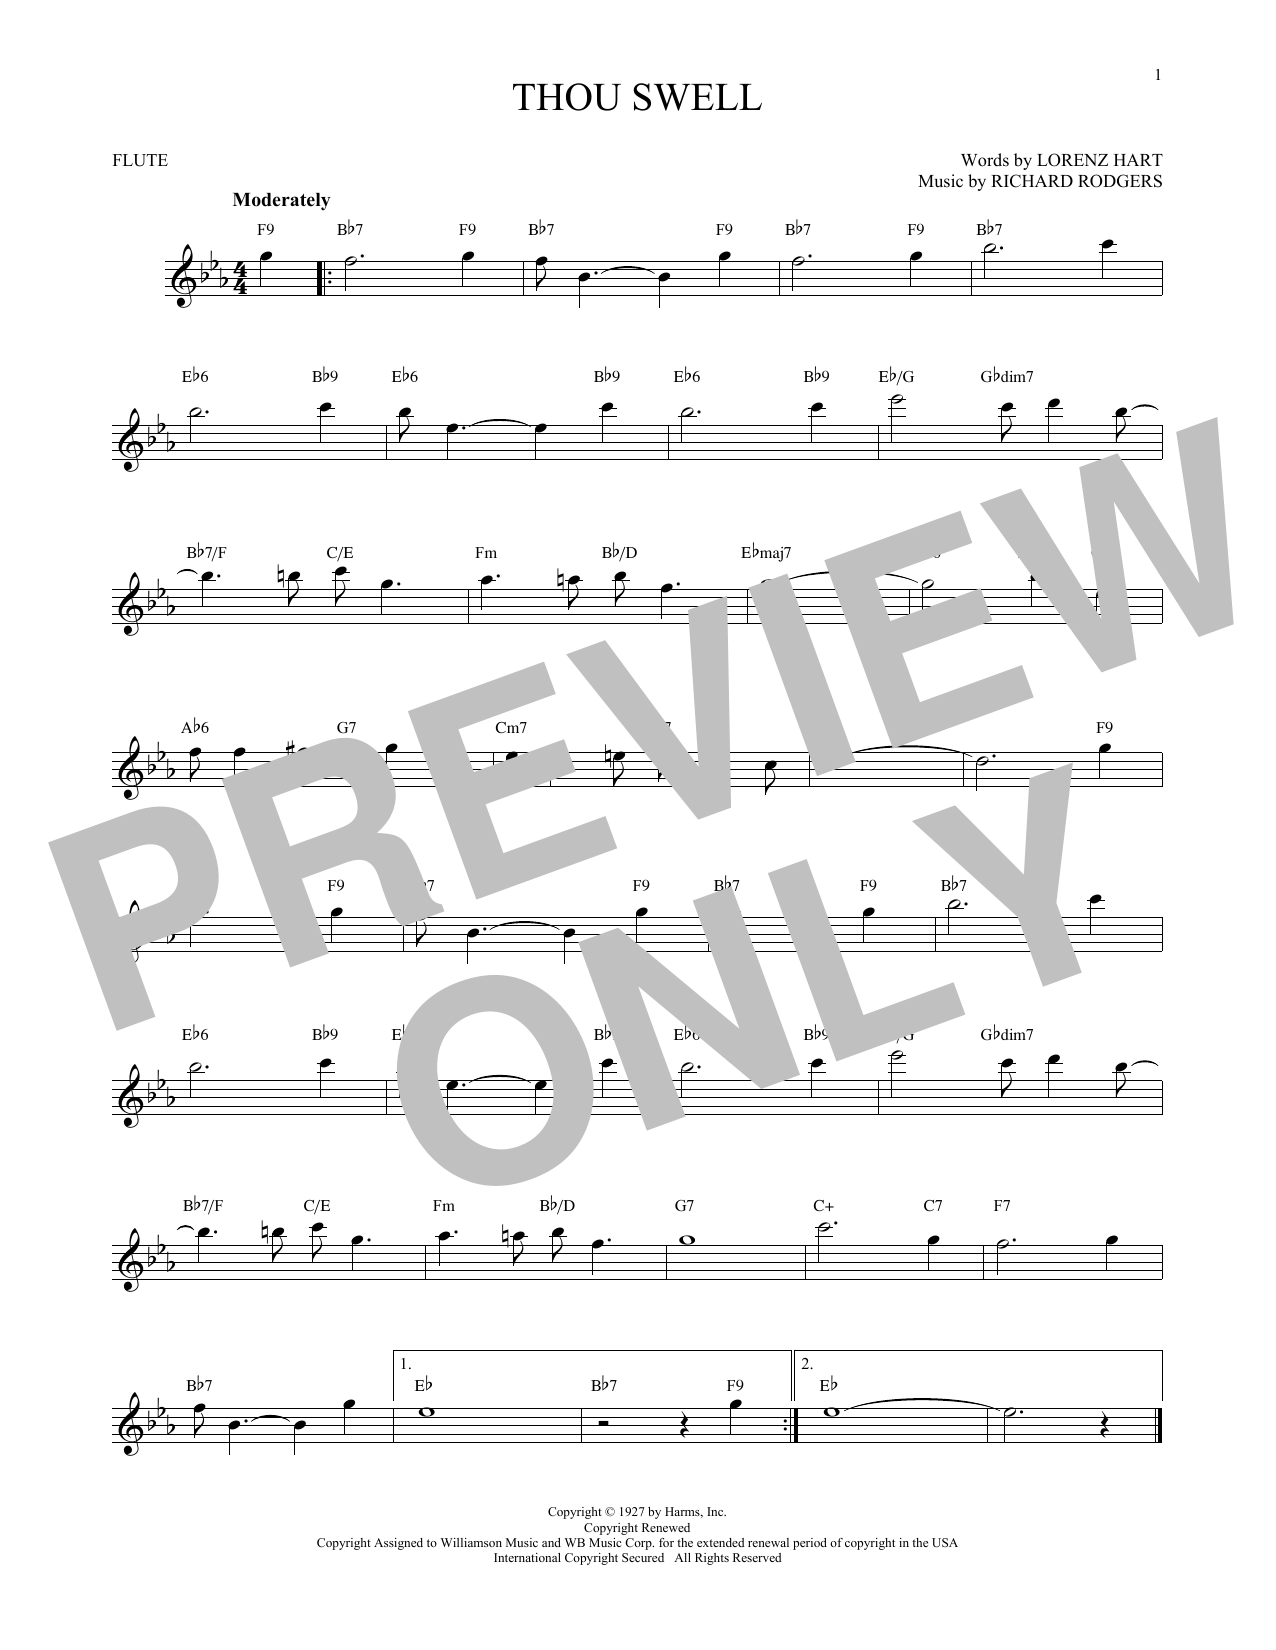 Download Rodgers & Hart Thou Swell Sheet Music